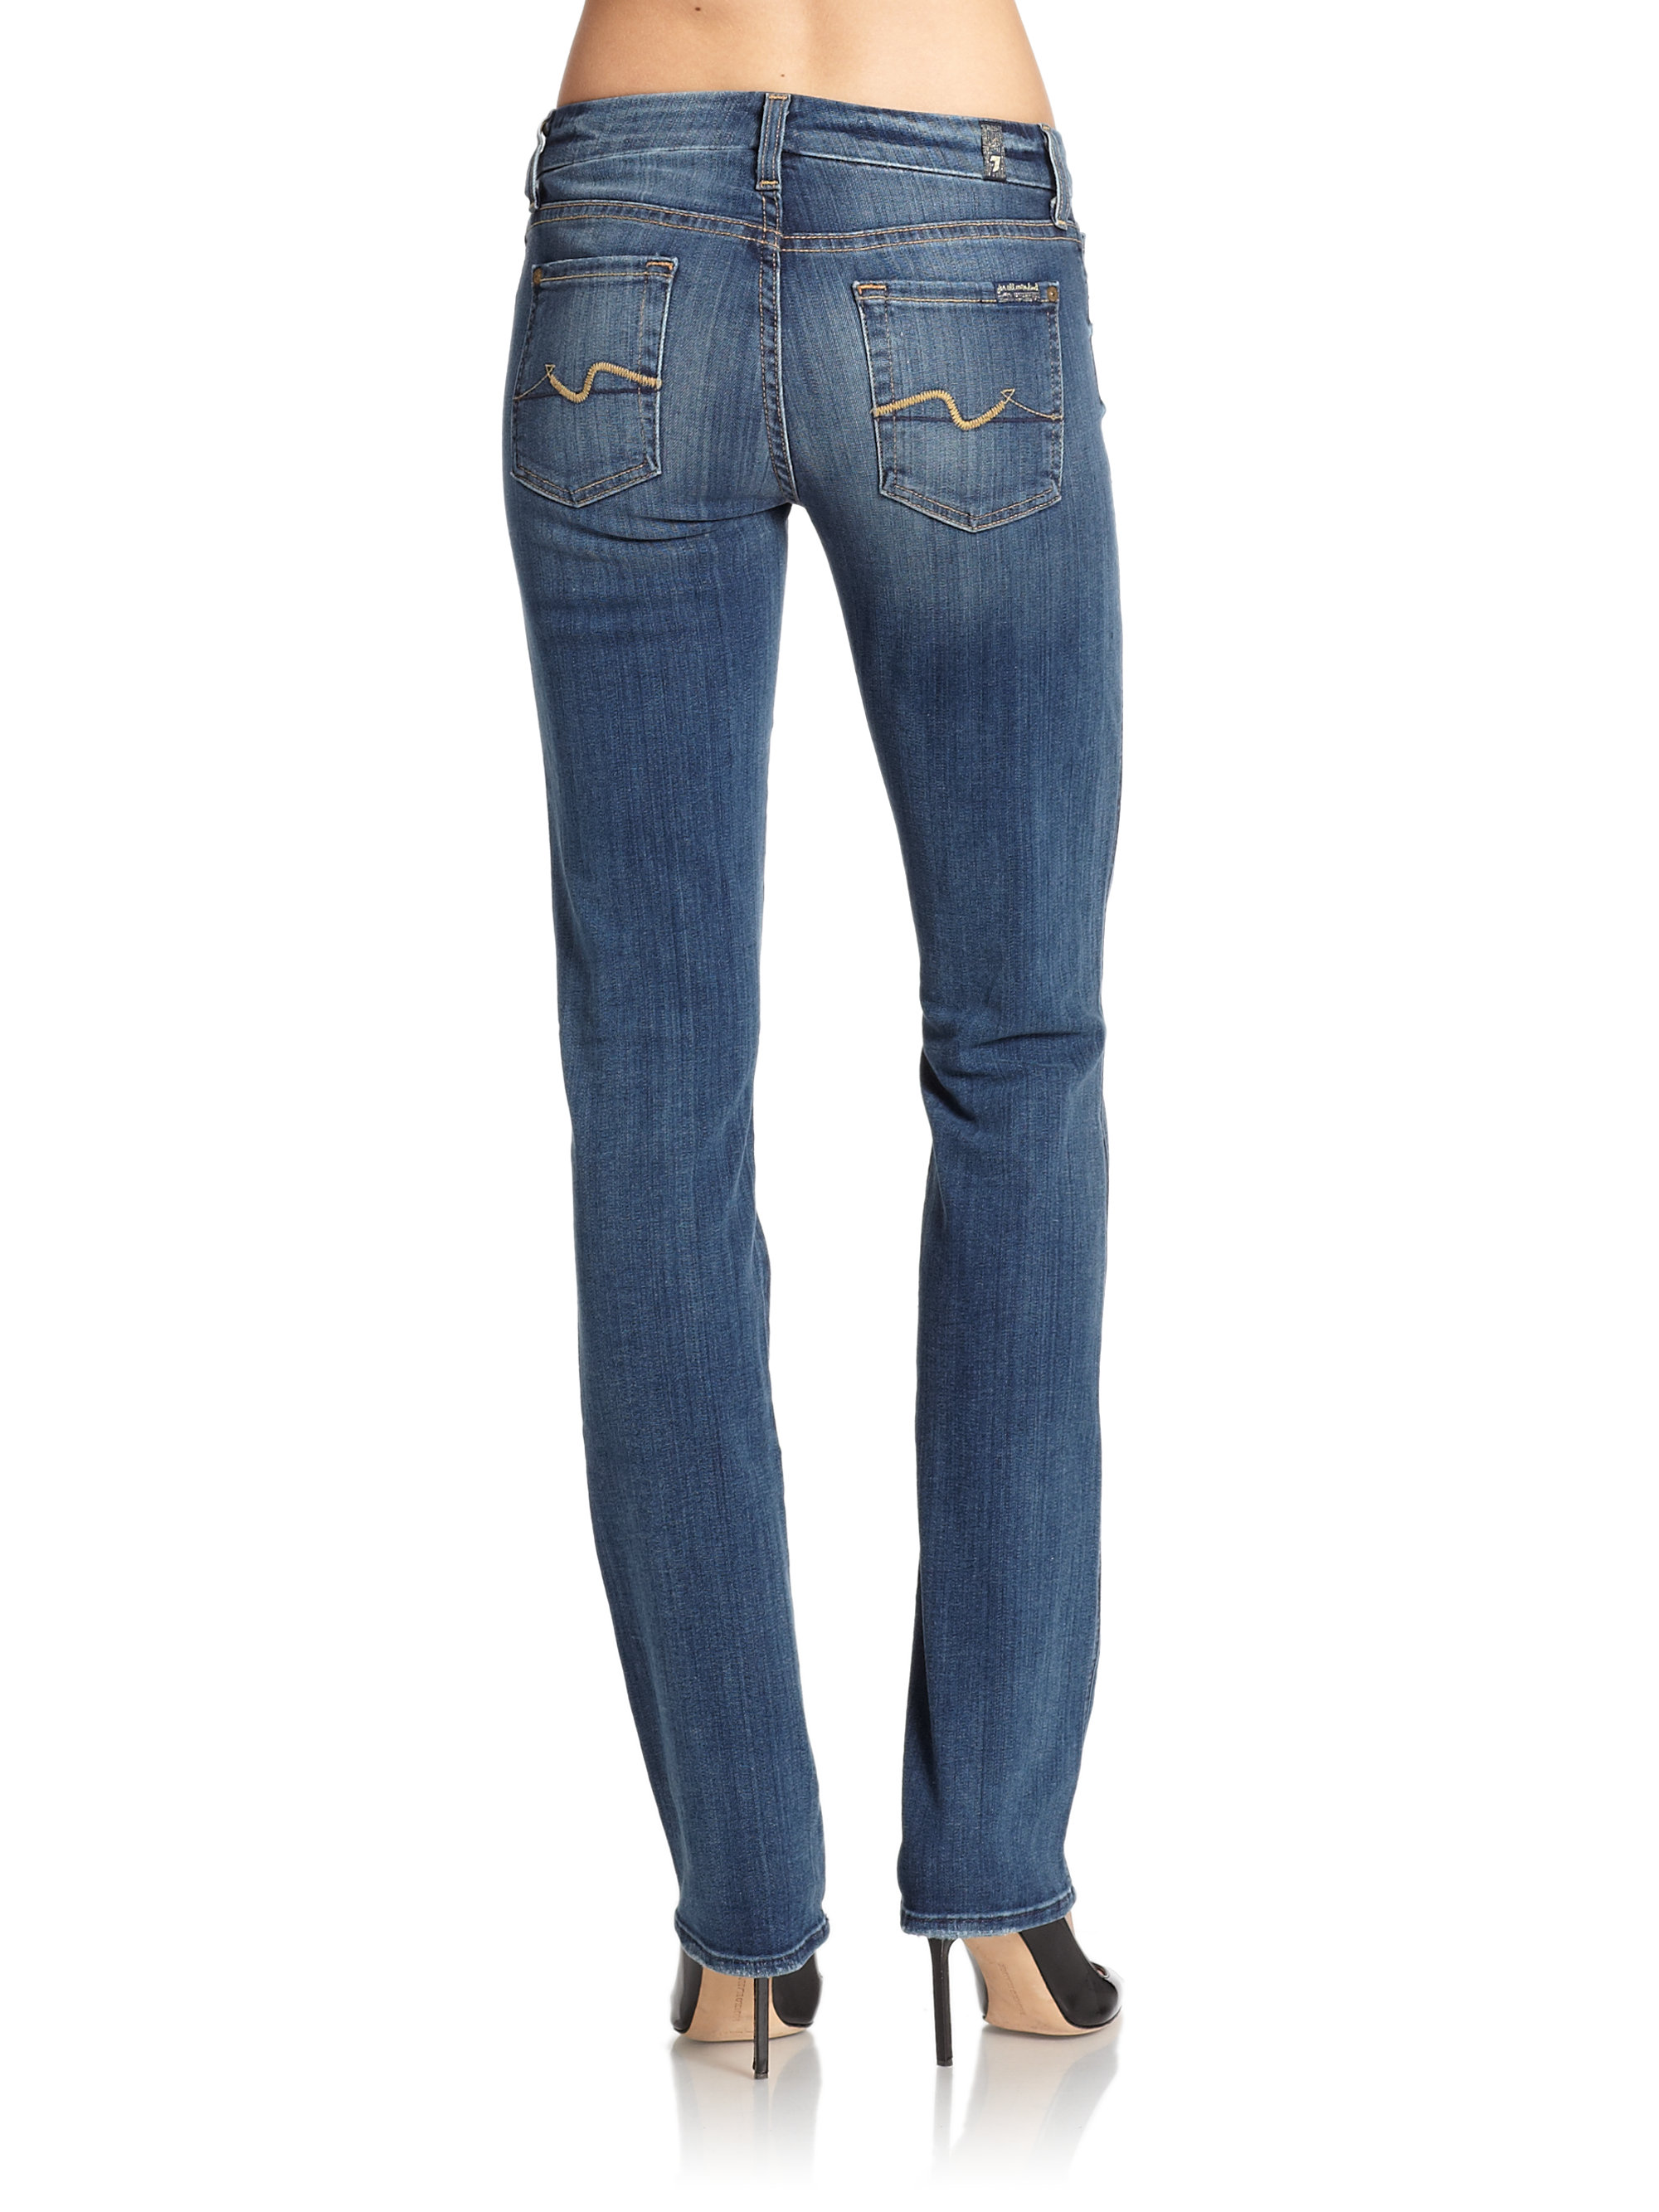 7 For All Mankind Kimmie Straight Leg Jeans in Blue - Lyst